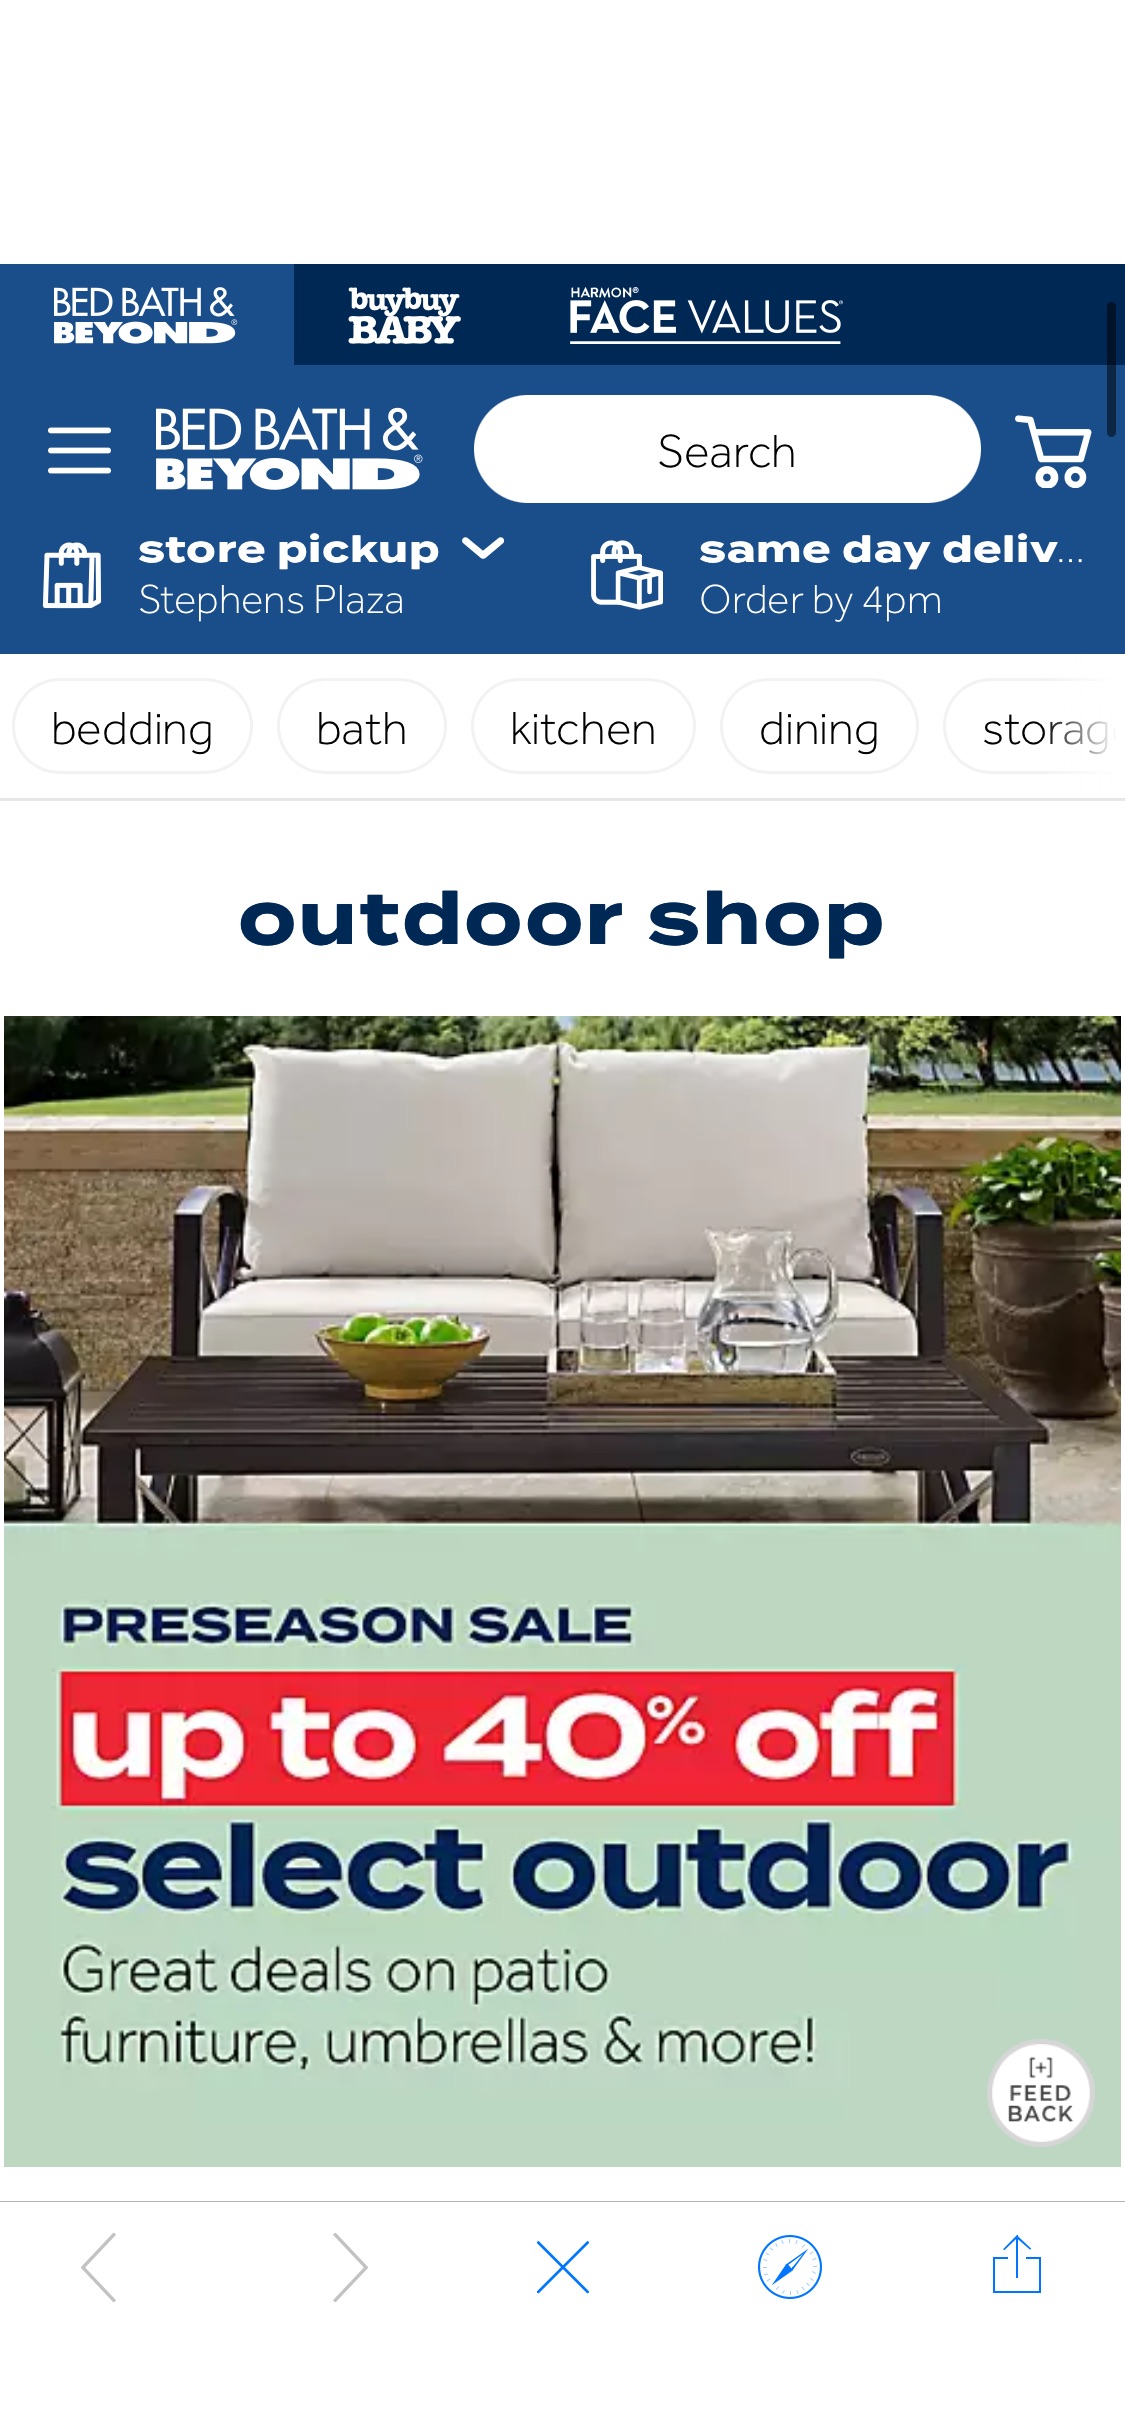 Outdoor Furniture, Patio Furniture Sets, Outdoor Decor, Cooking | Bed Bath & Beyond 阳台装饰品等促销